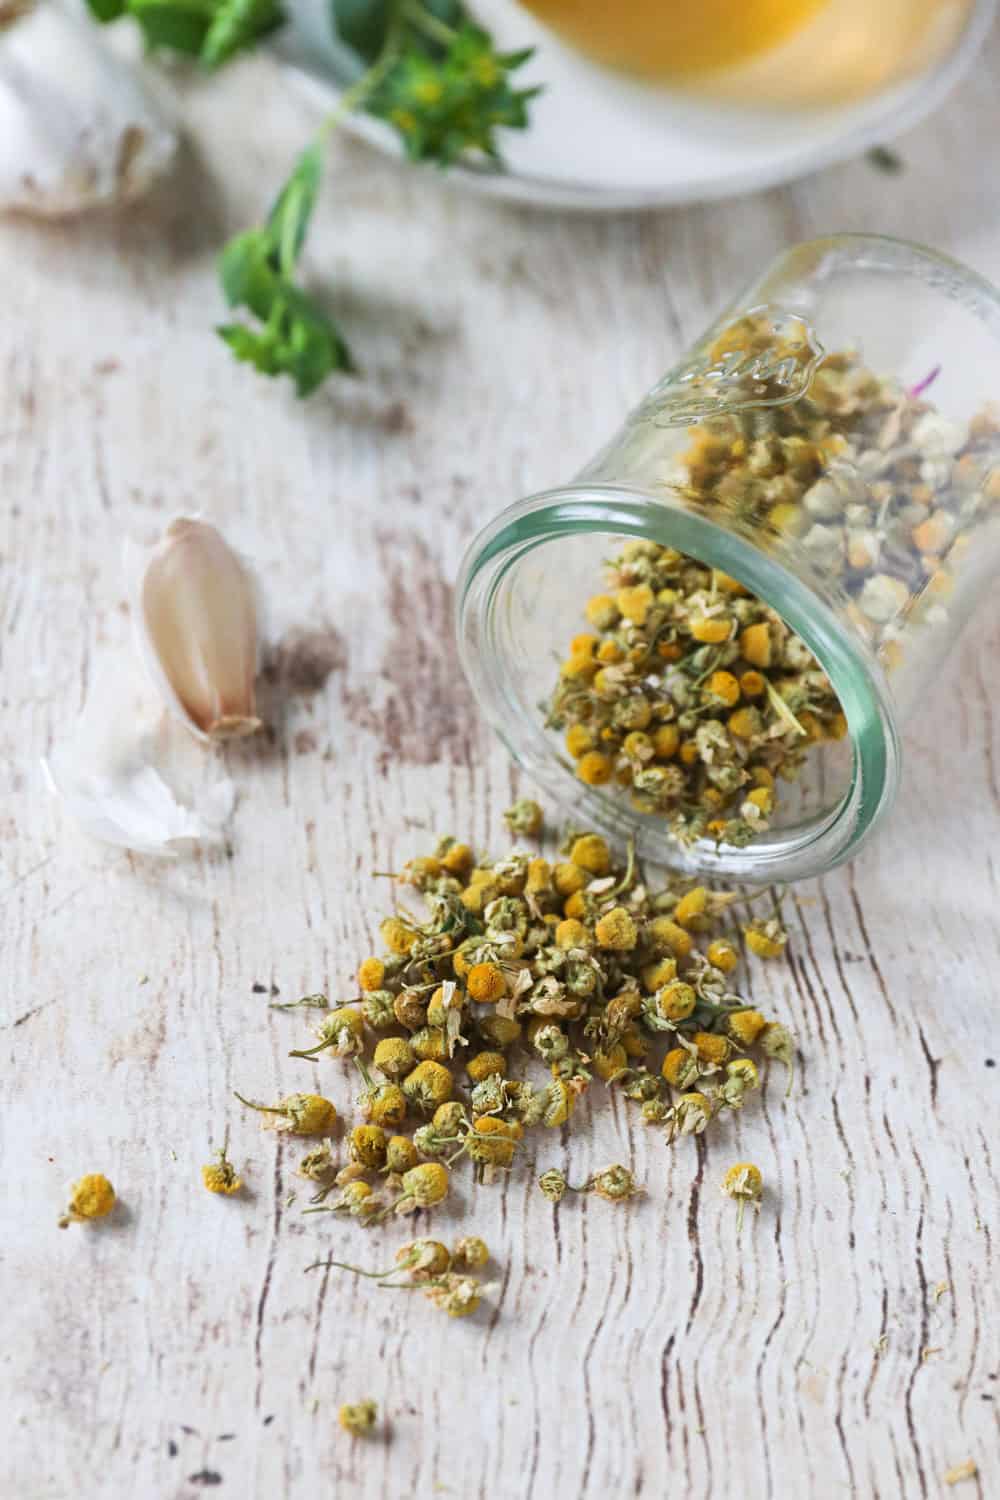 This Herbal Elixir Is a Natural Sore Throat Remedy